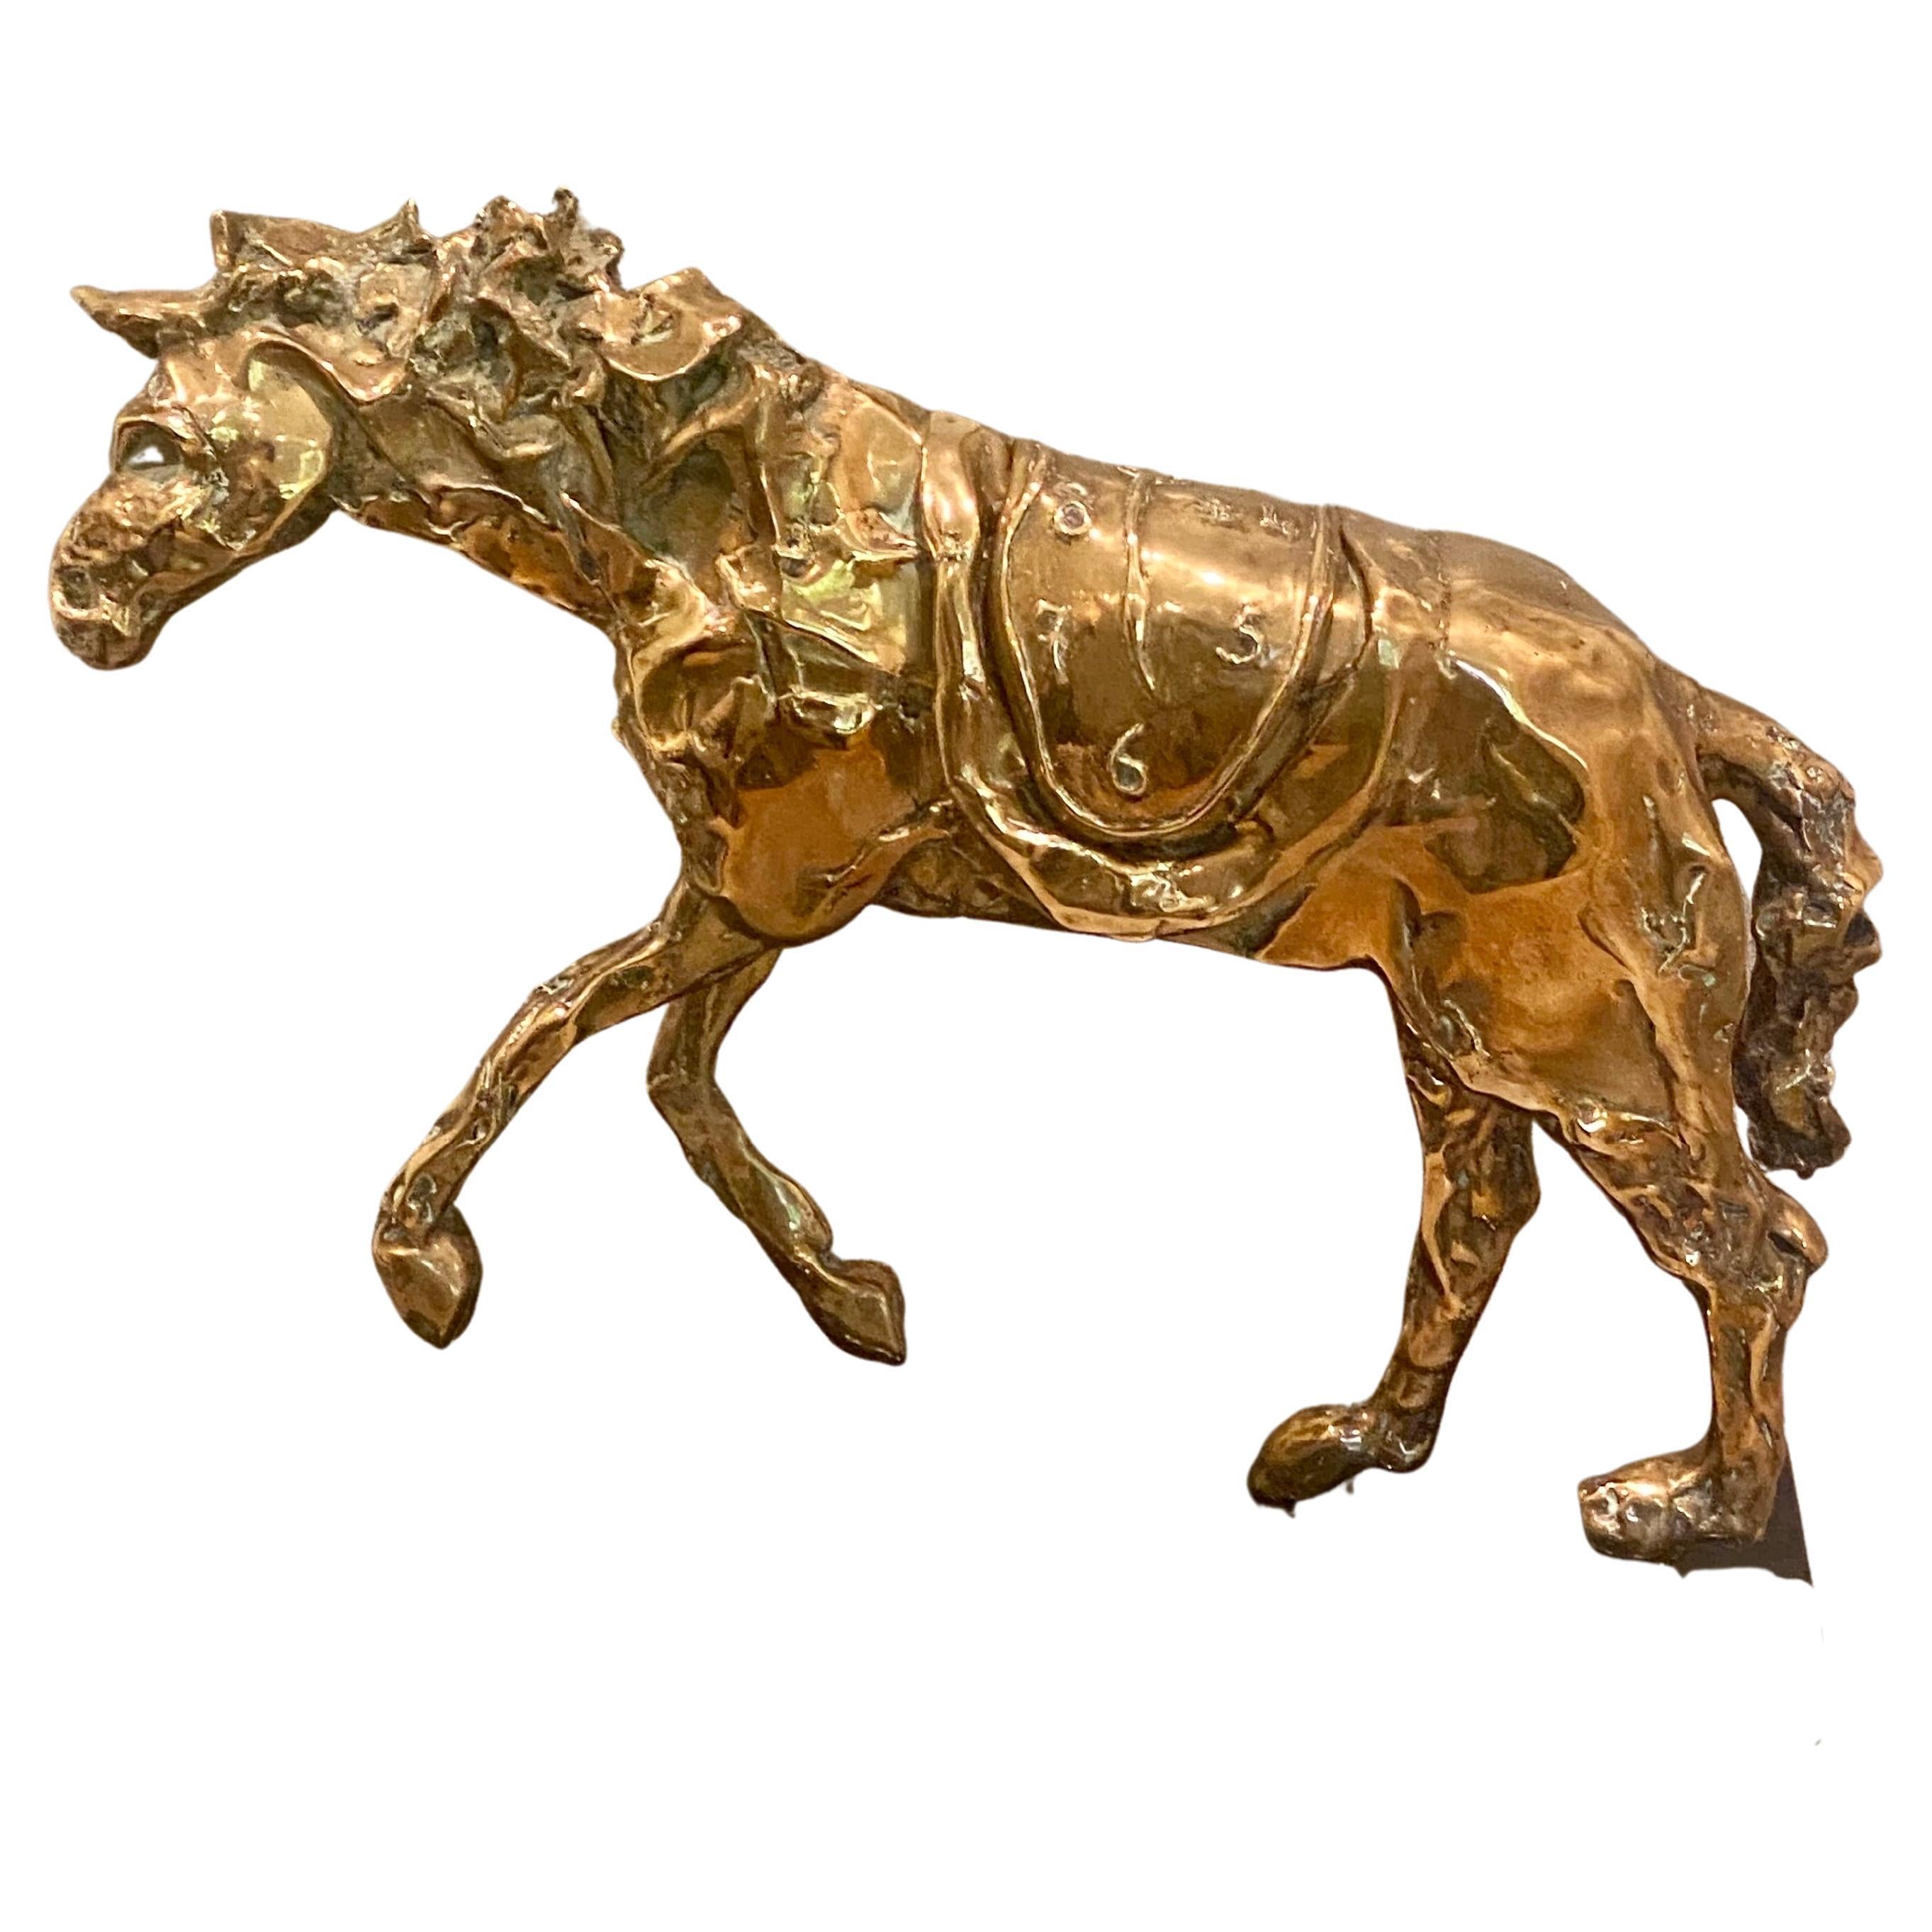 Le cheval à la montre molle
A Superb Bronze by and inscribed by 'Dalí' (on the back right leg), stamped with foundry mark and numbered 314/350 (underneath the saddle) and stamped with foundry mark and dated 'c Camblest 1981' (under the horse)
Solid